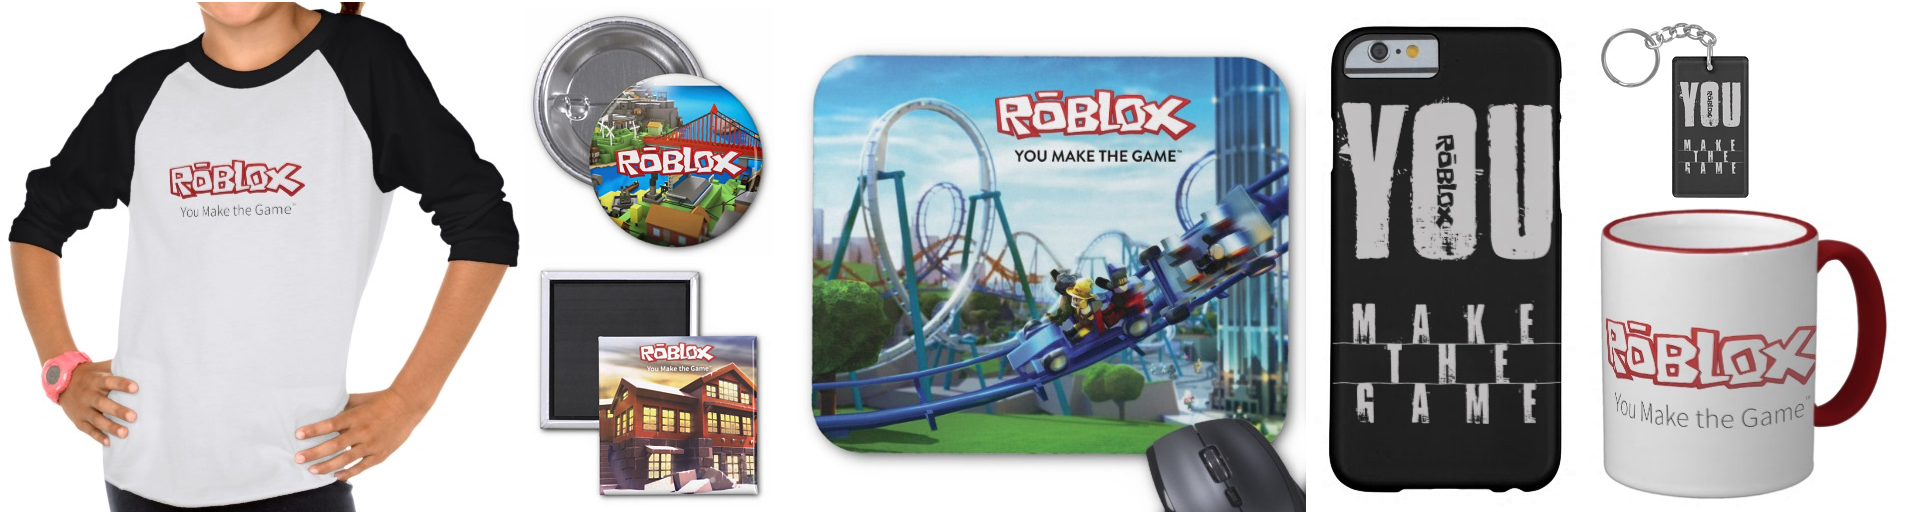 Roblox Store Fan Gear Guides Gift Certificates And More Virtual Worlds For Teens